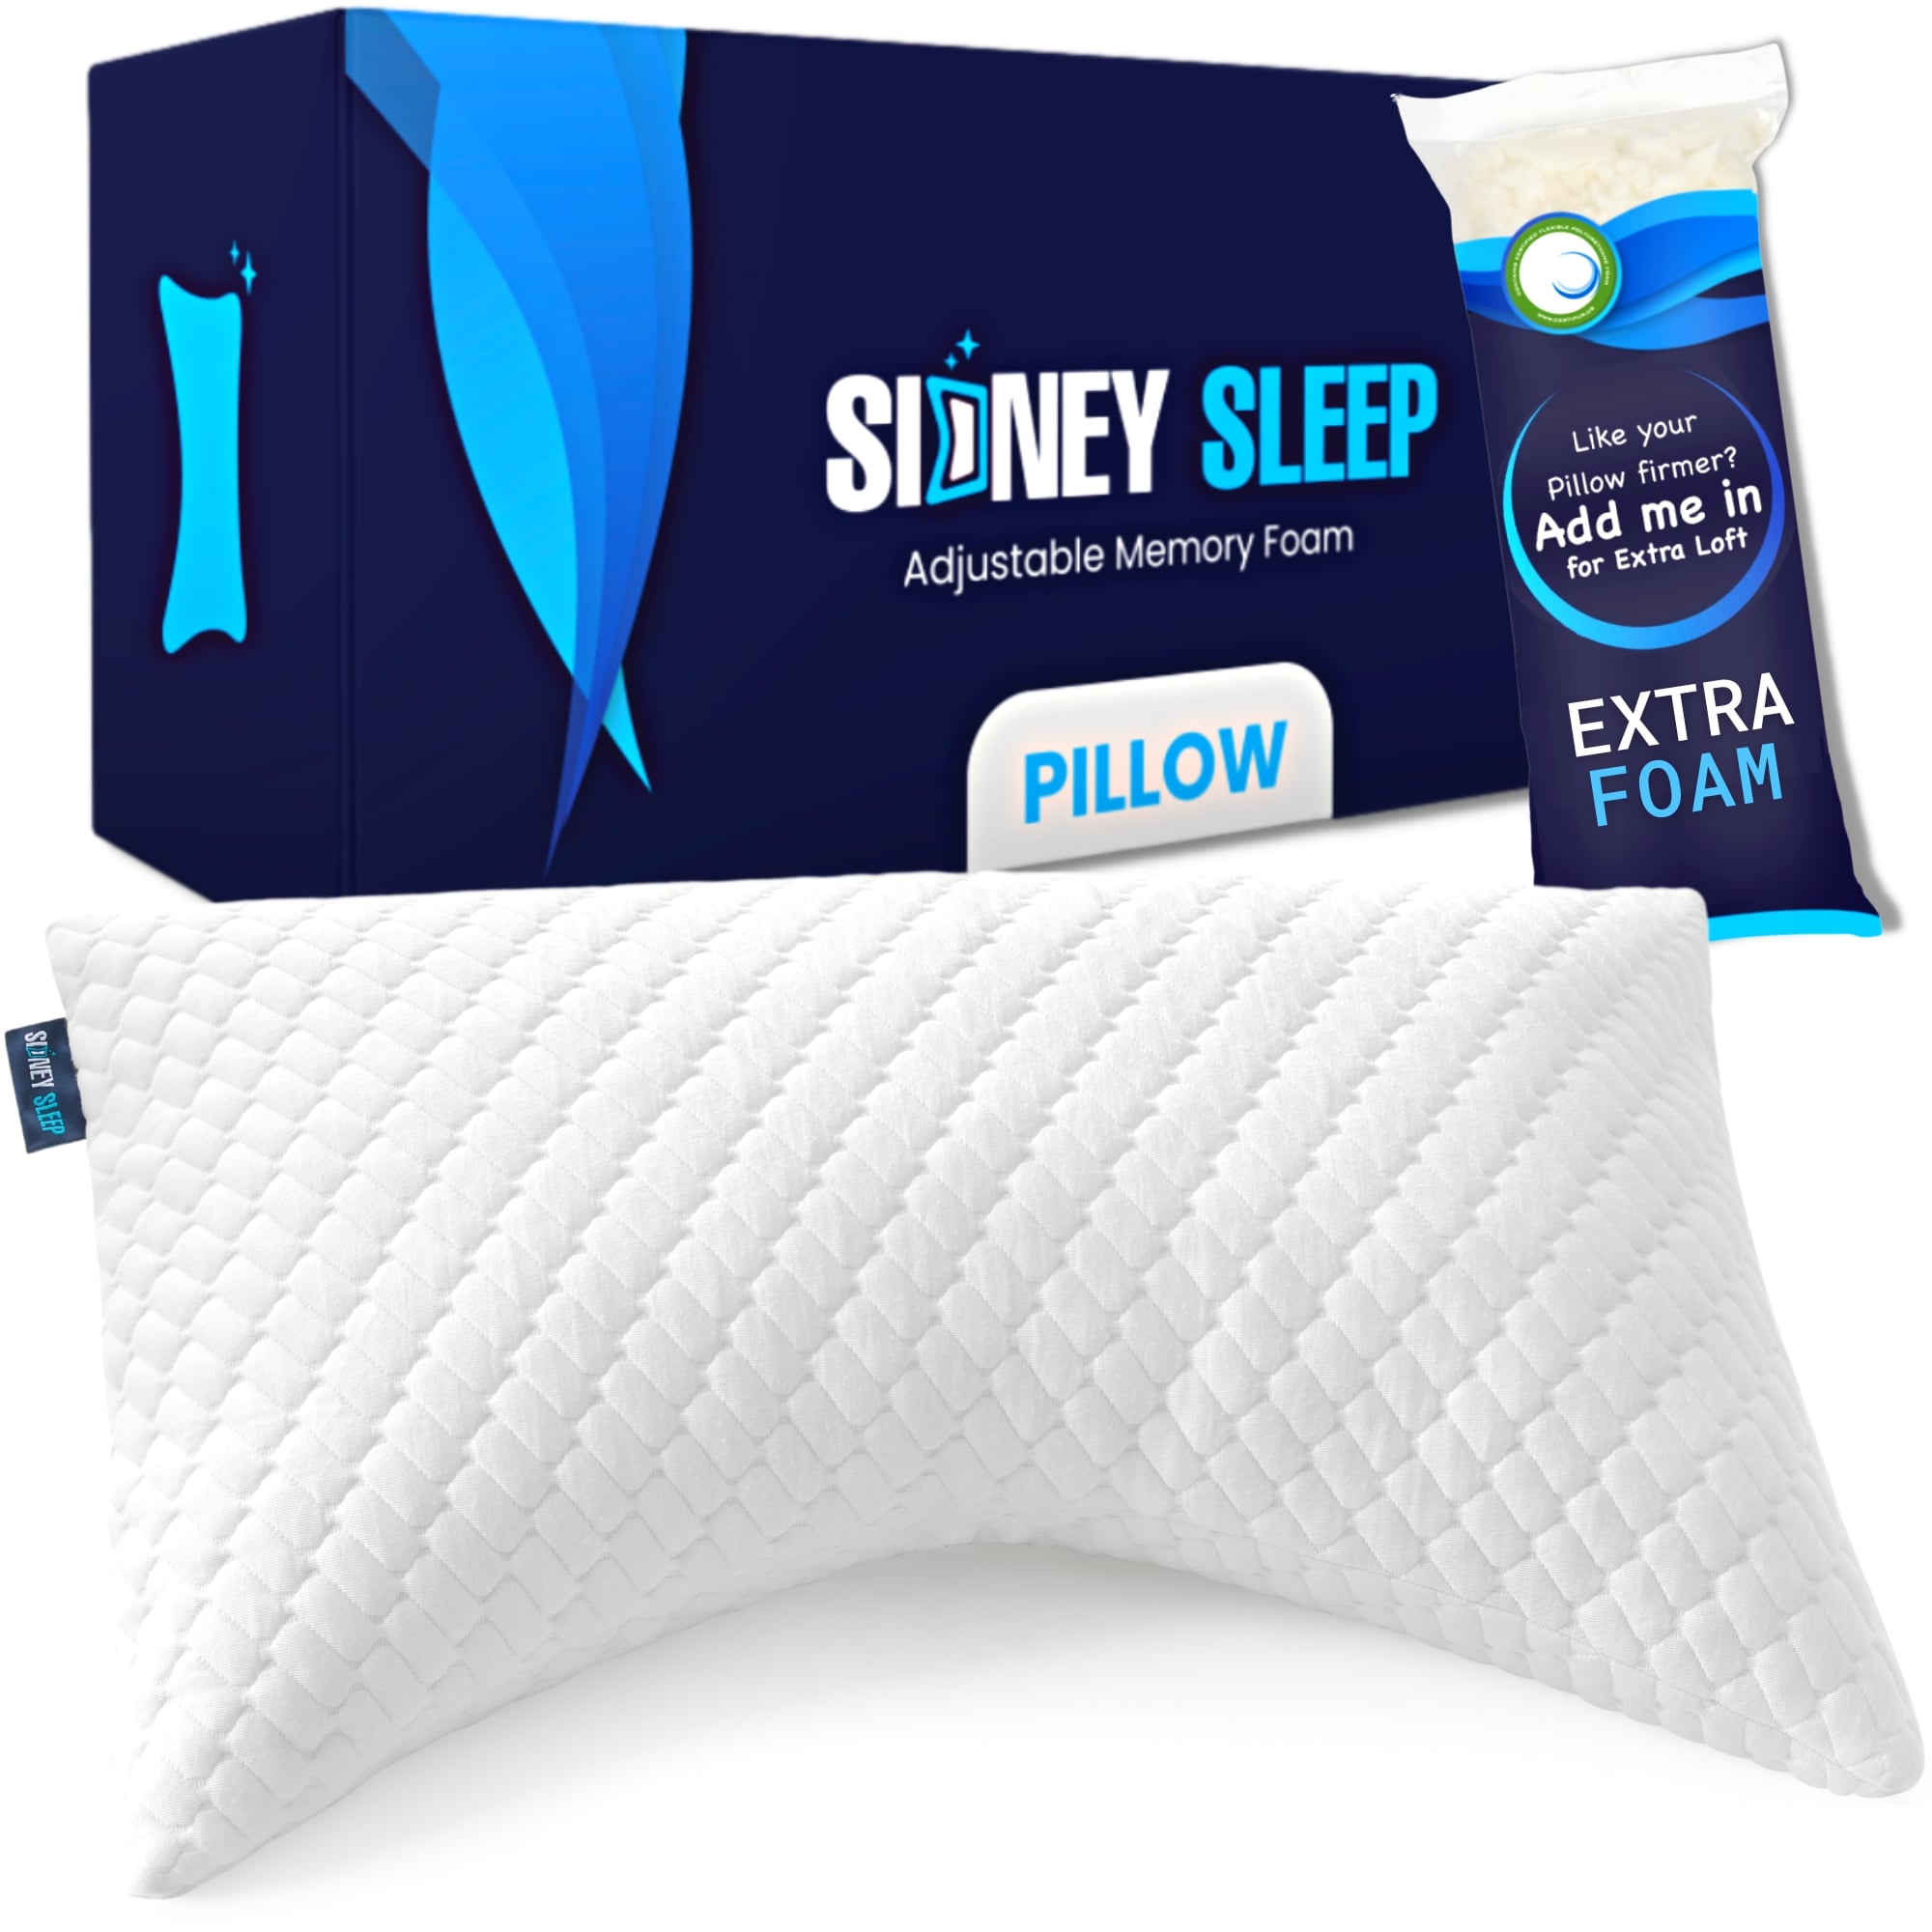 Adjustable Bed Pillow For Sleeping, White Queen Size Pillows